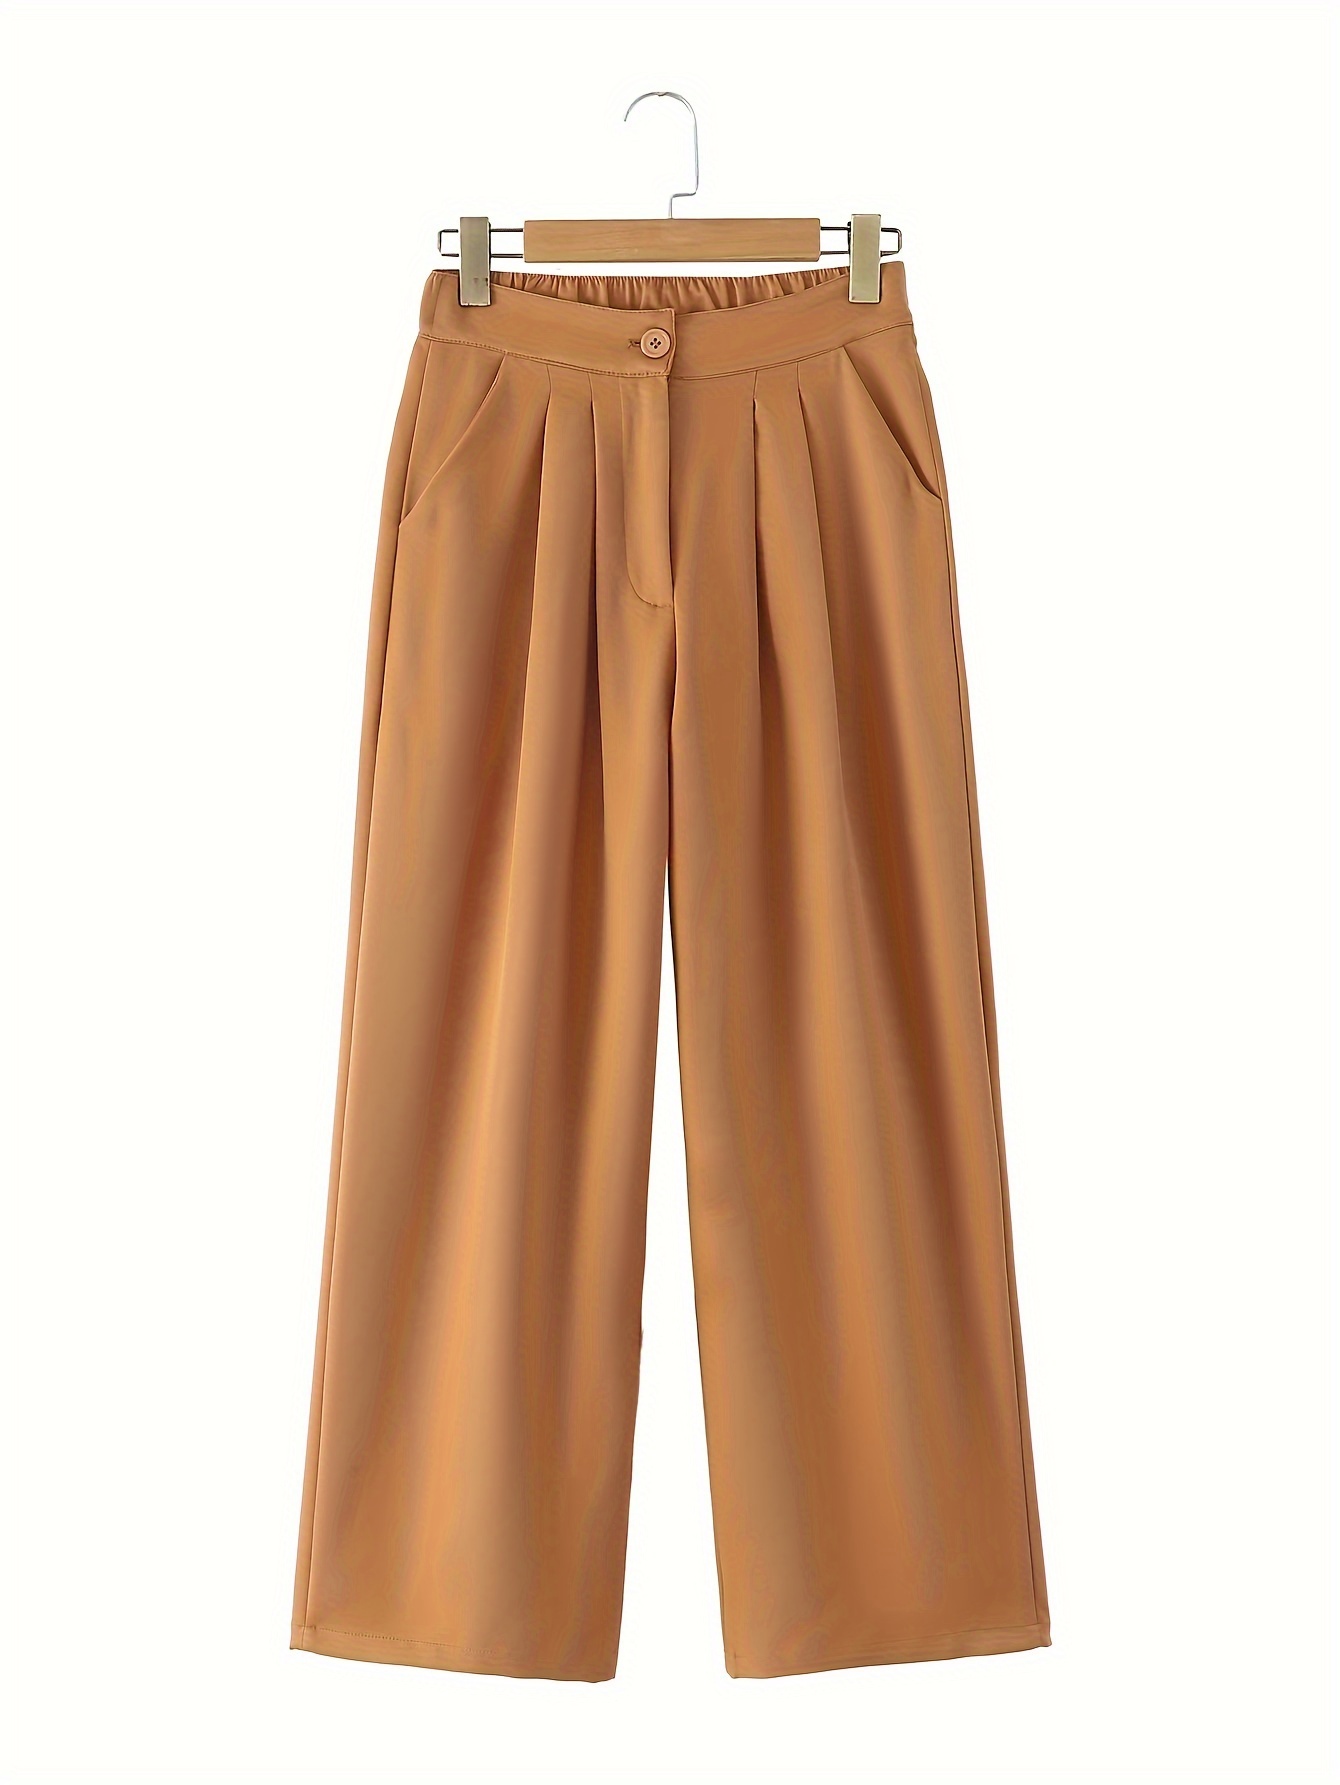 High Waist Wide Leg Pants, Casual Loose Pants For Spring & Summer, Women's  Clothing